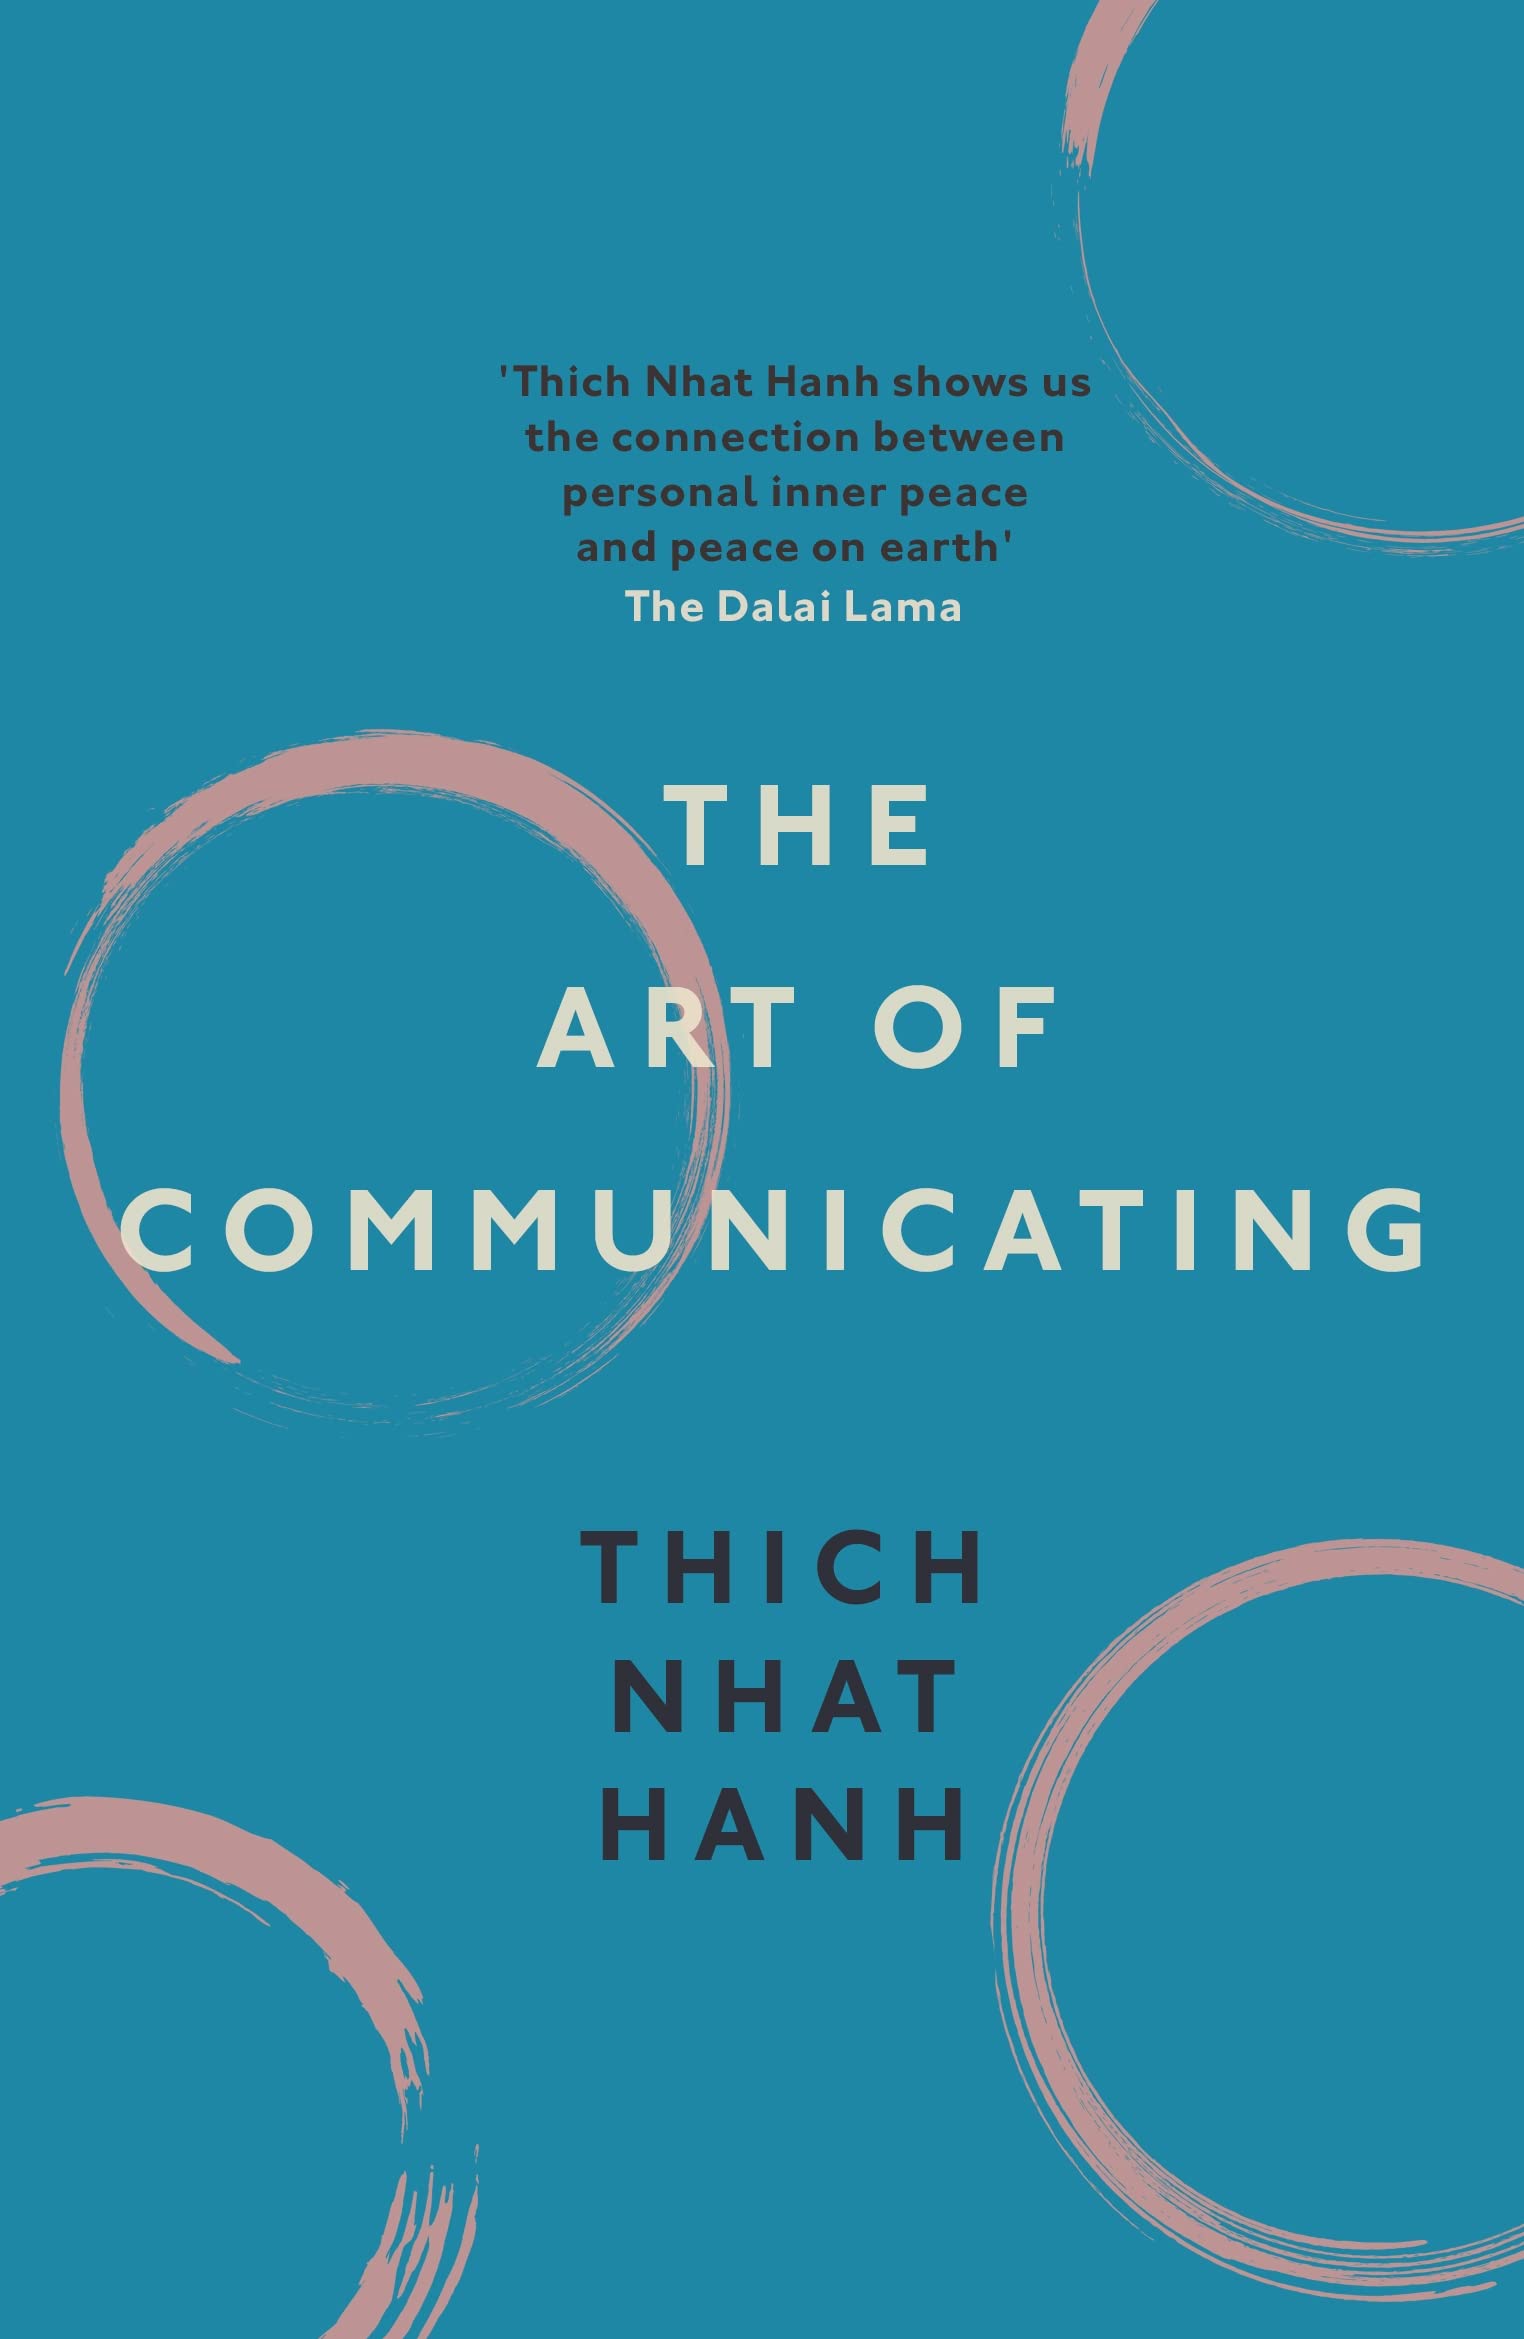 Book: The Art of Communicating Writer: Thich Nhat Hanh